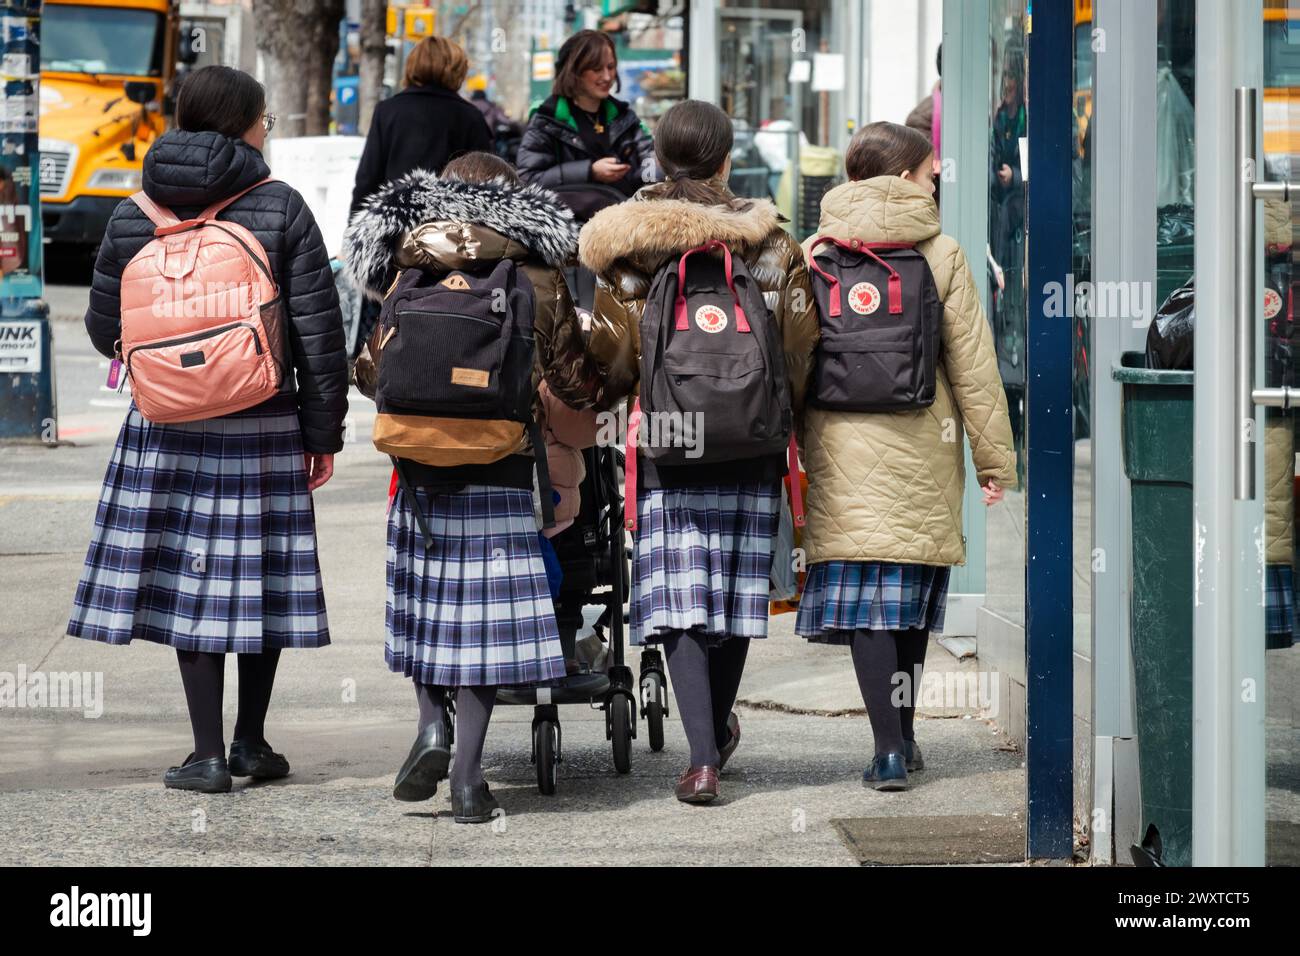 Four  orthodox Jewish girls in identical skirts walk together  in Brooklyn, New York. They are classmates in their school uniforms. Stock Photo